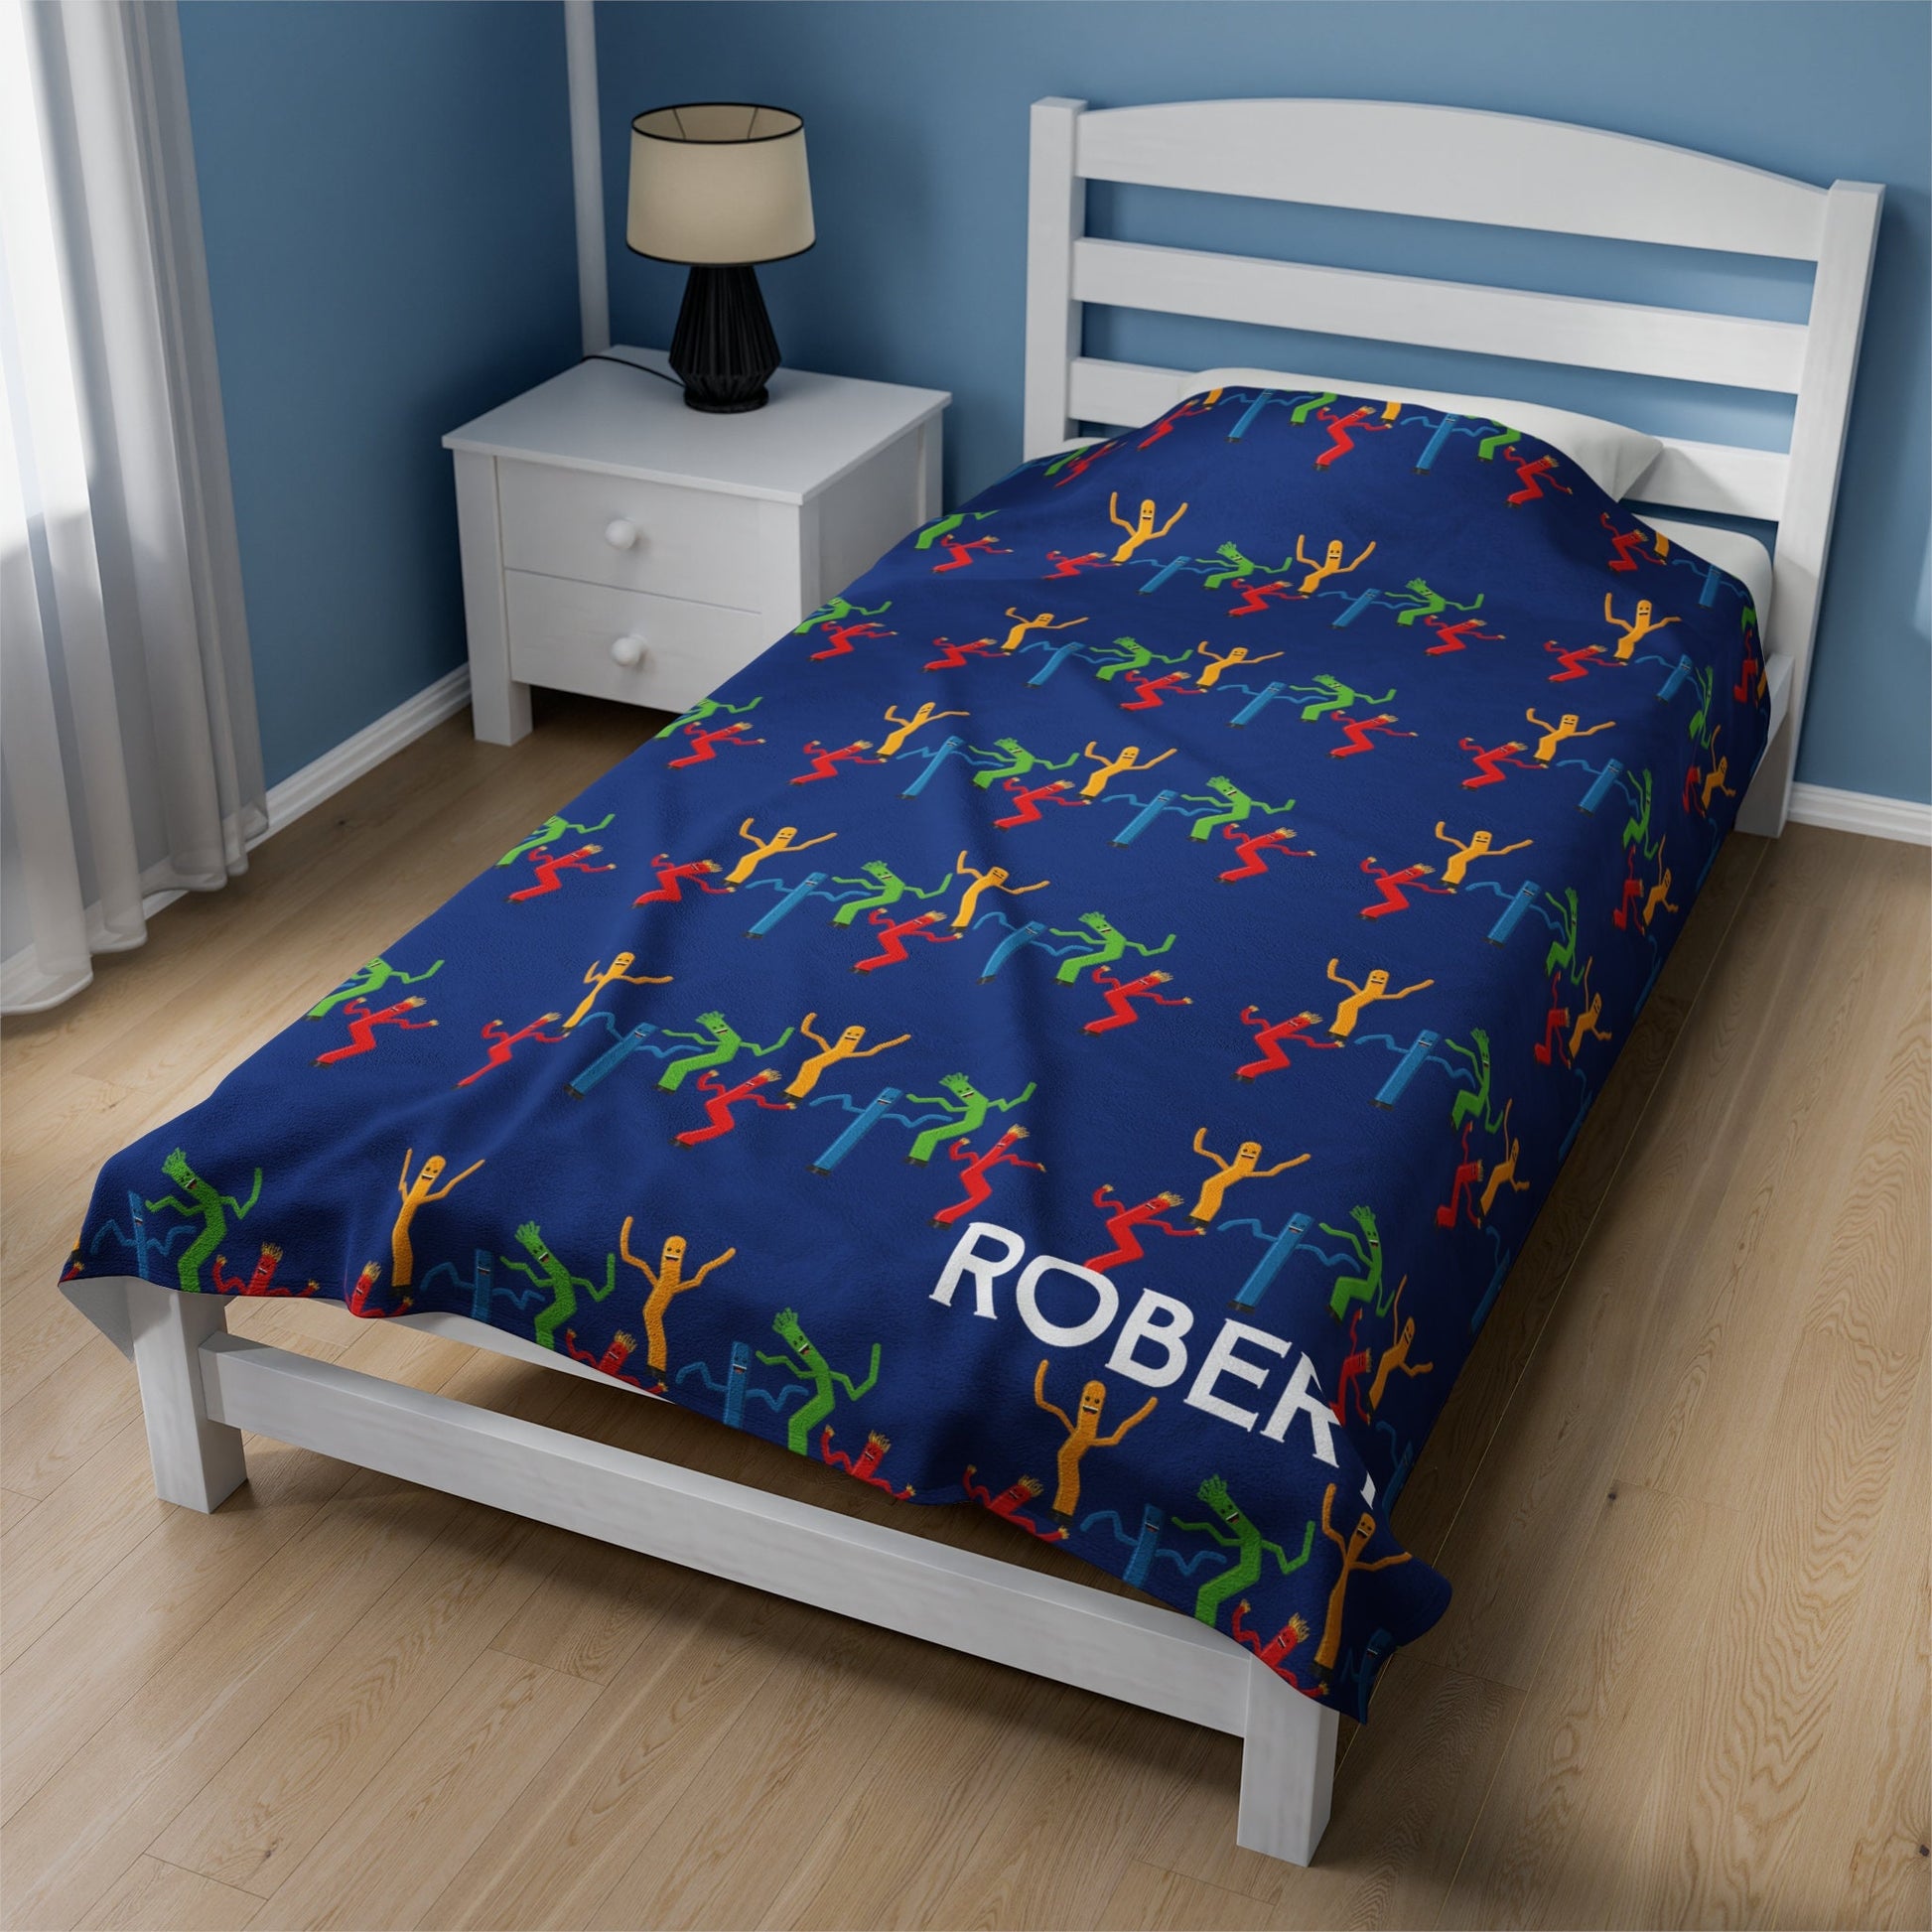 a bed with a blue bedspread with colorful people on it